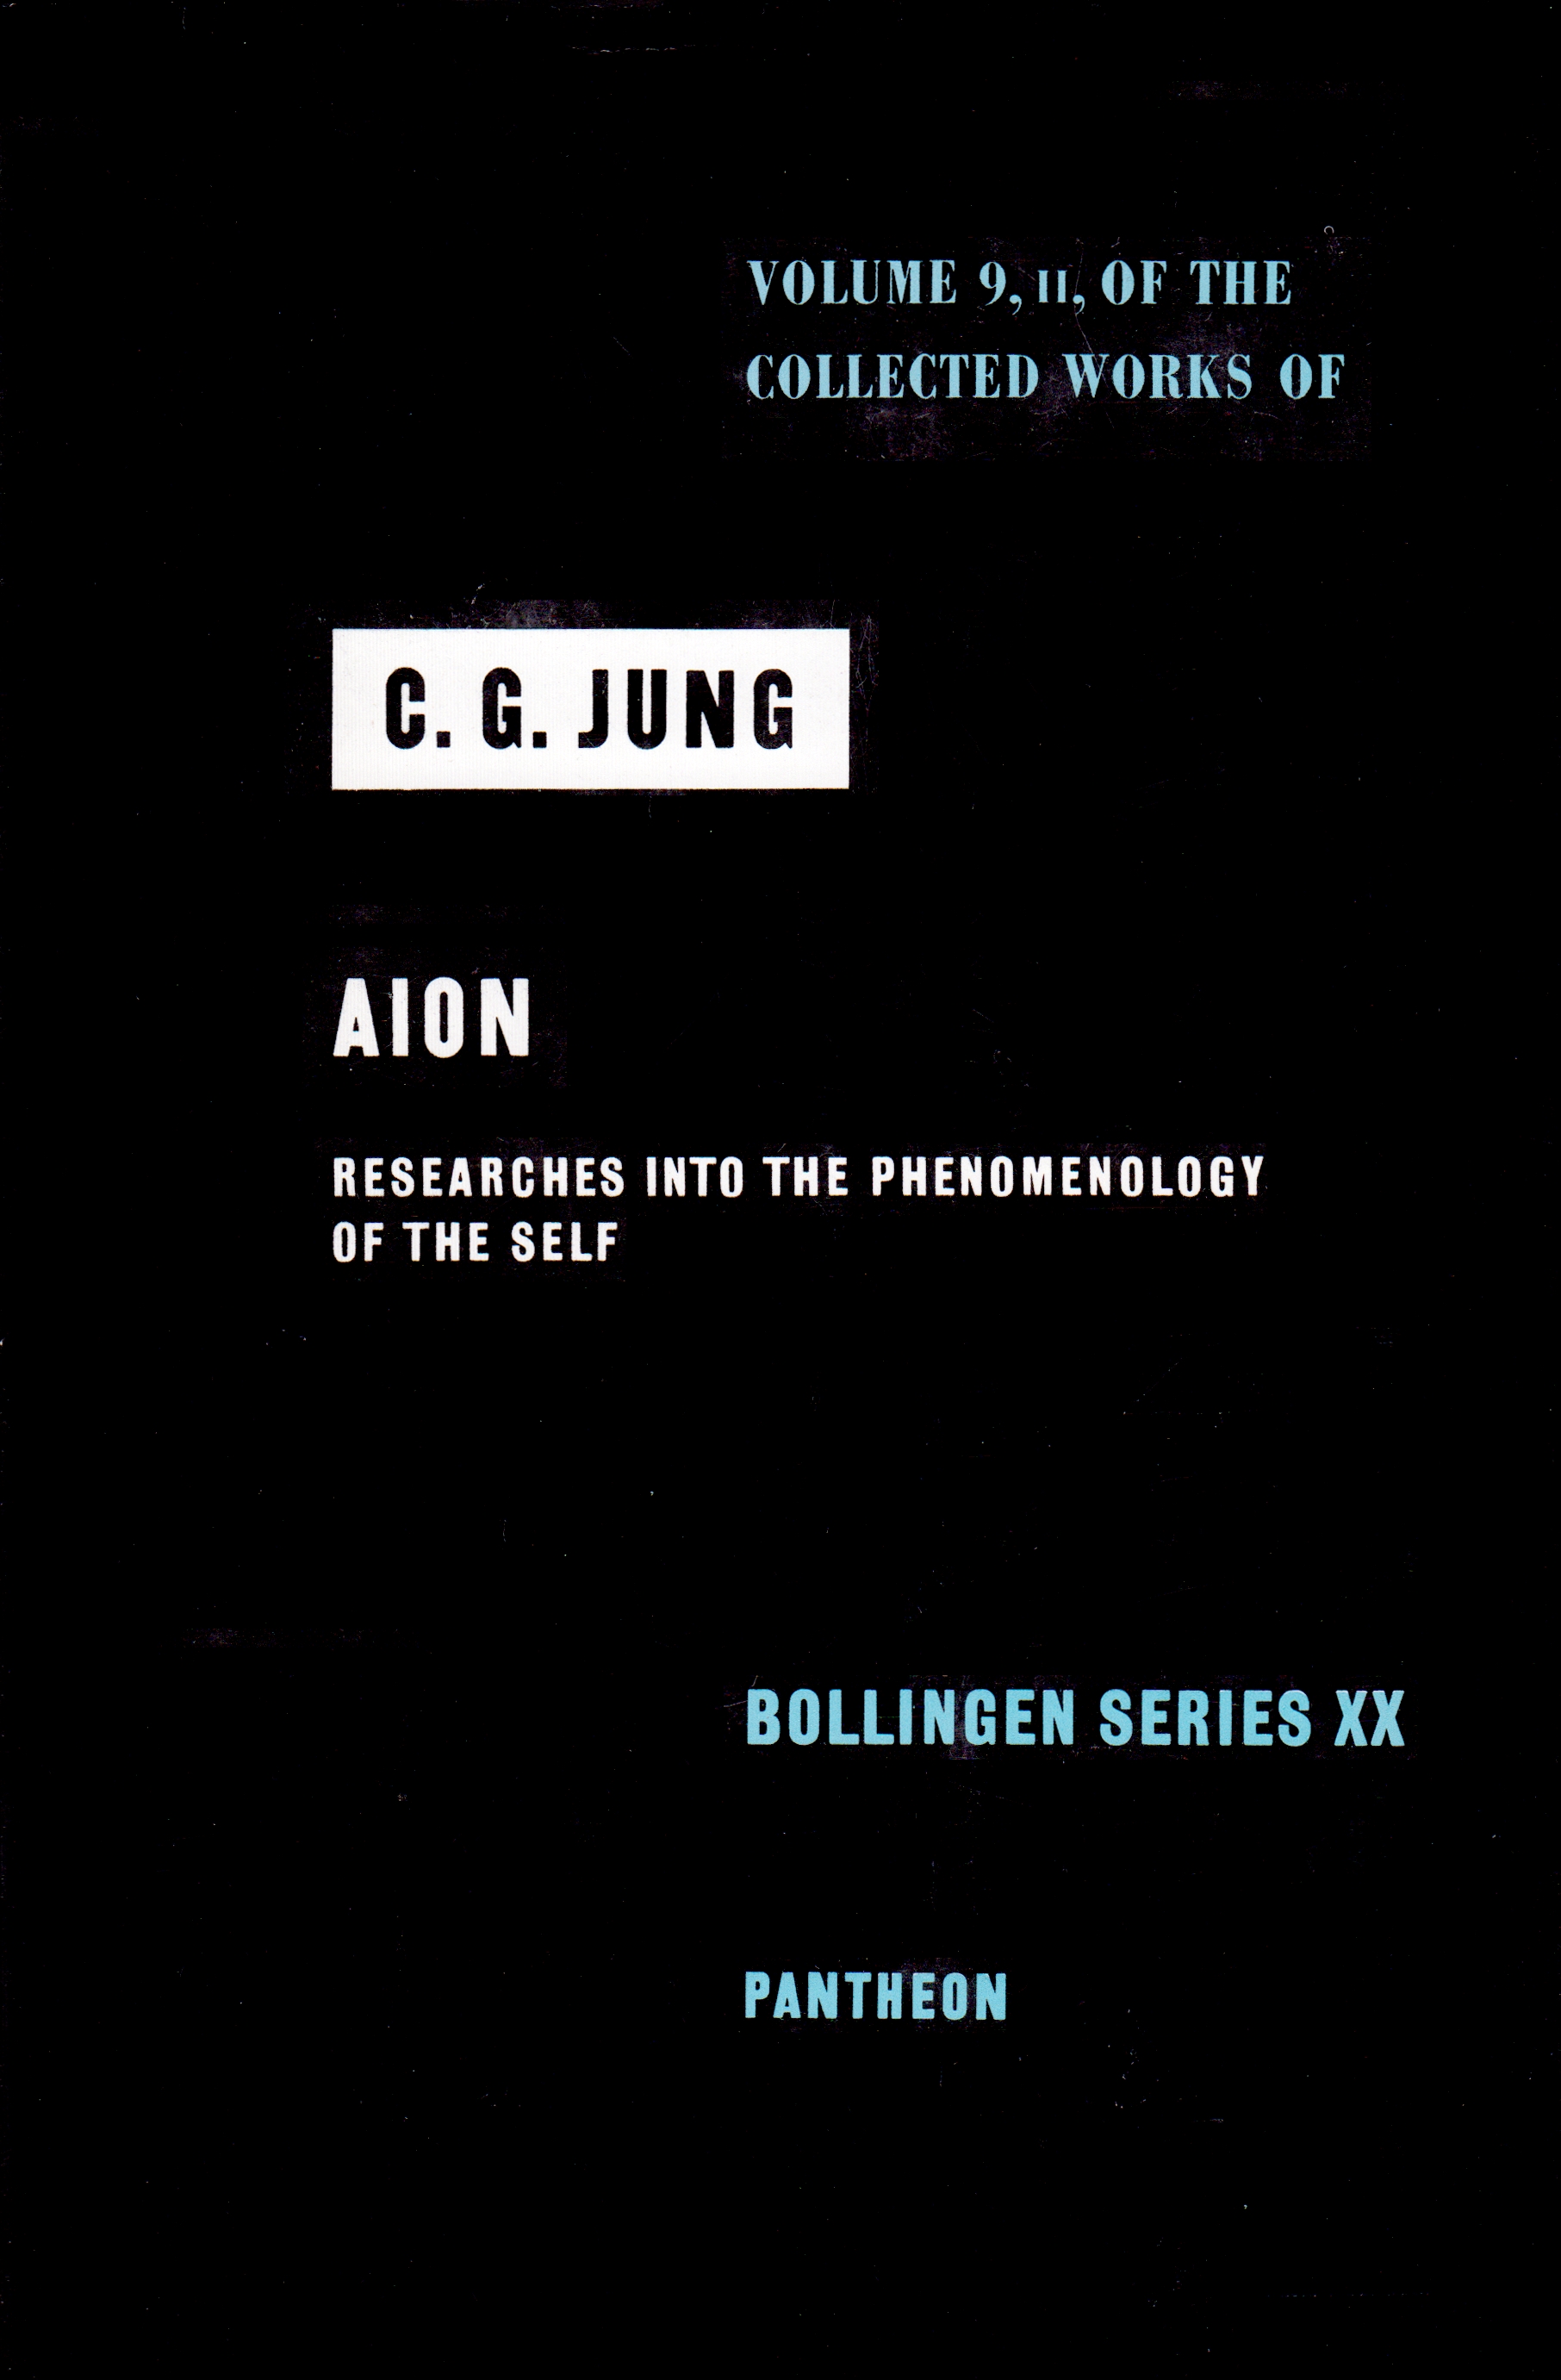 Collected Works of C.G. Jung, Volume 9 (Part 2) | Princeton ...